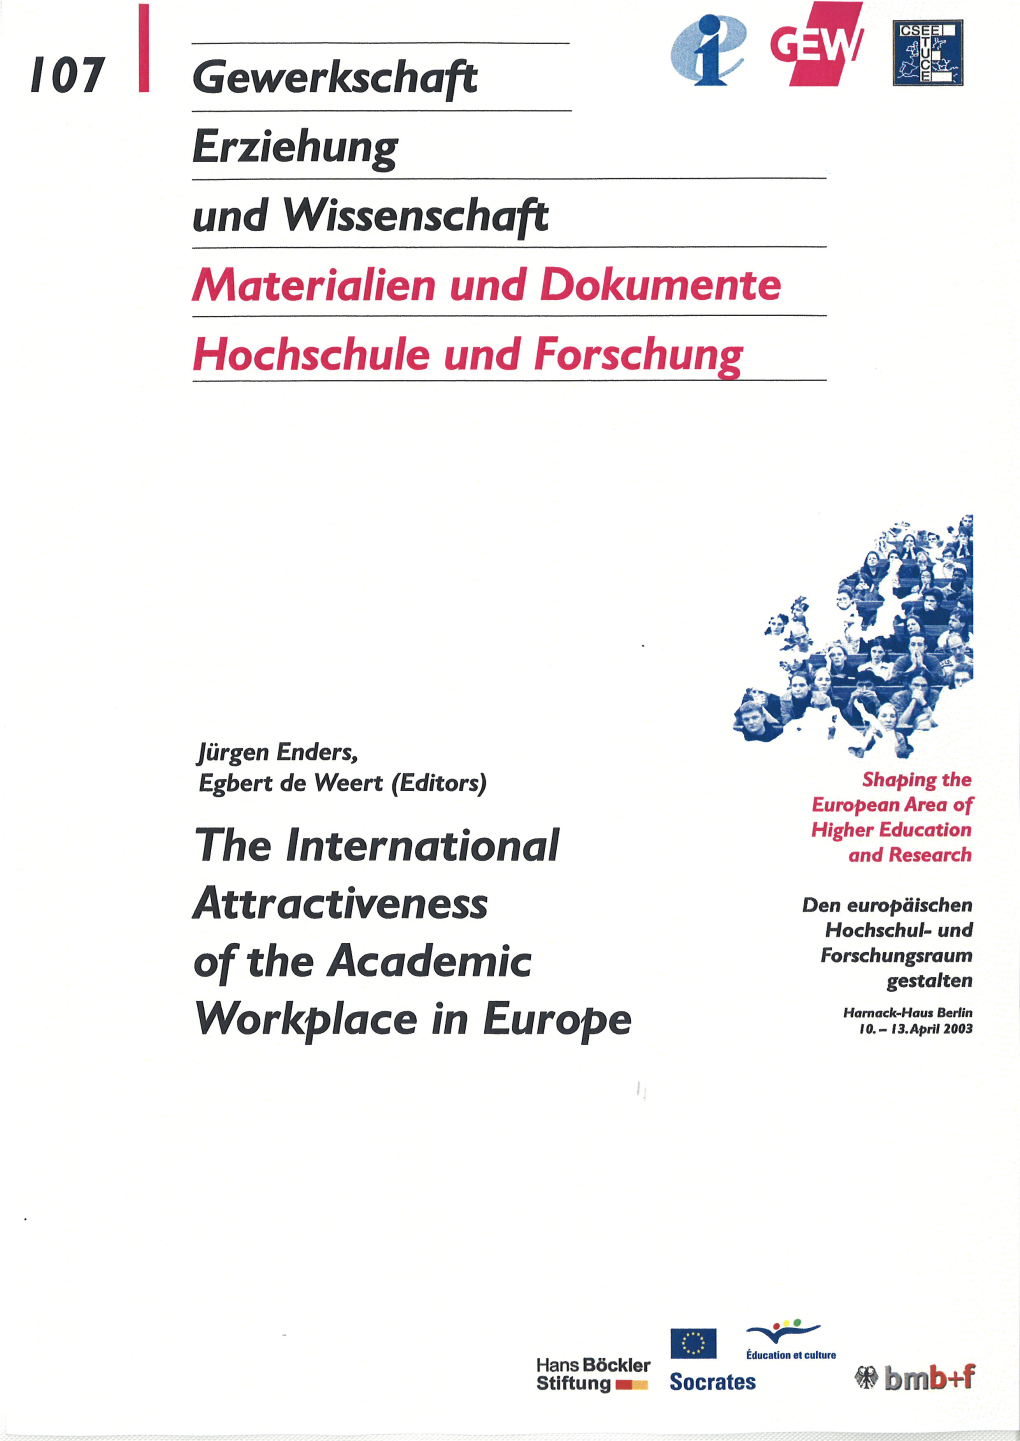 (2003) Study on the International Attractiveness of The